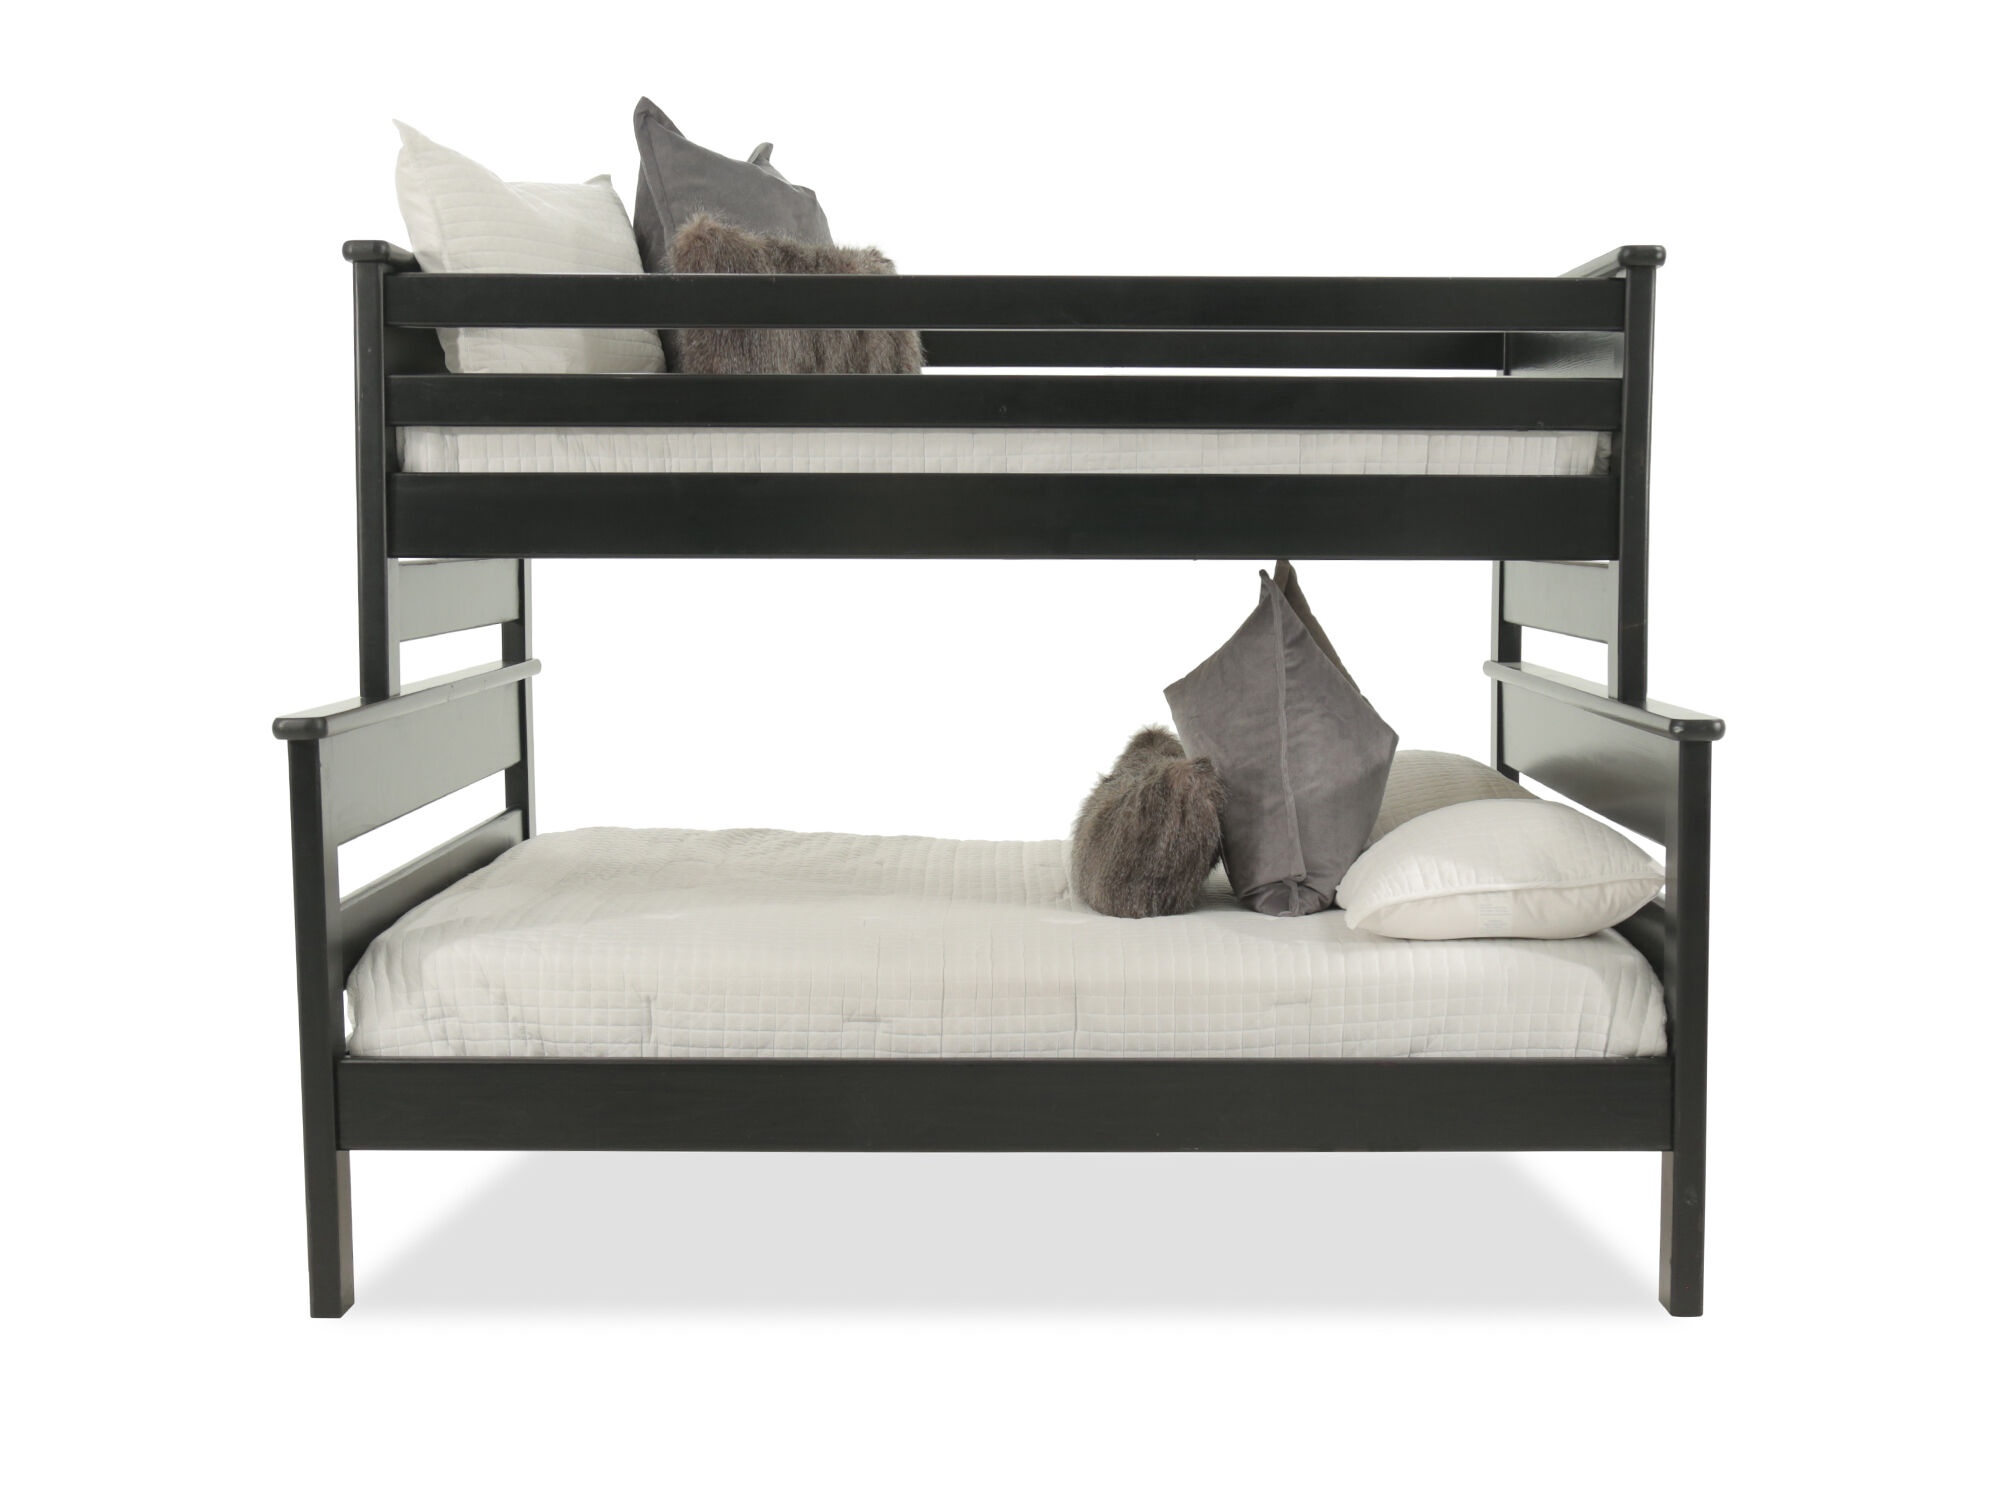 Transitional Youth Twin Over Full Bunk, Mathis Brothers Bunk Beds